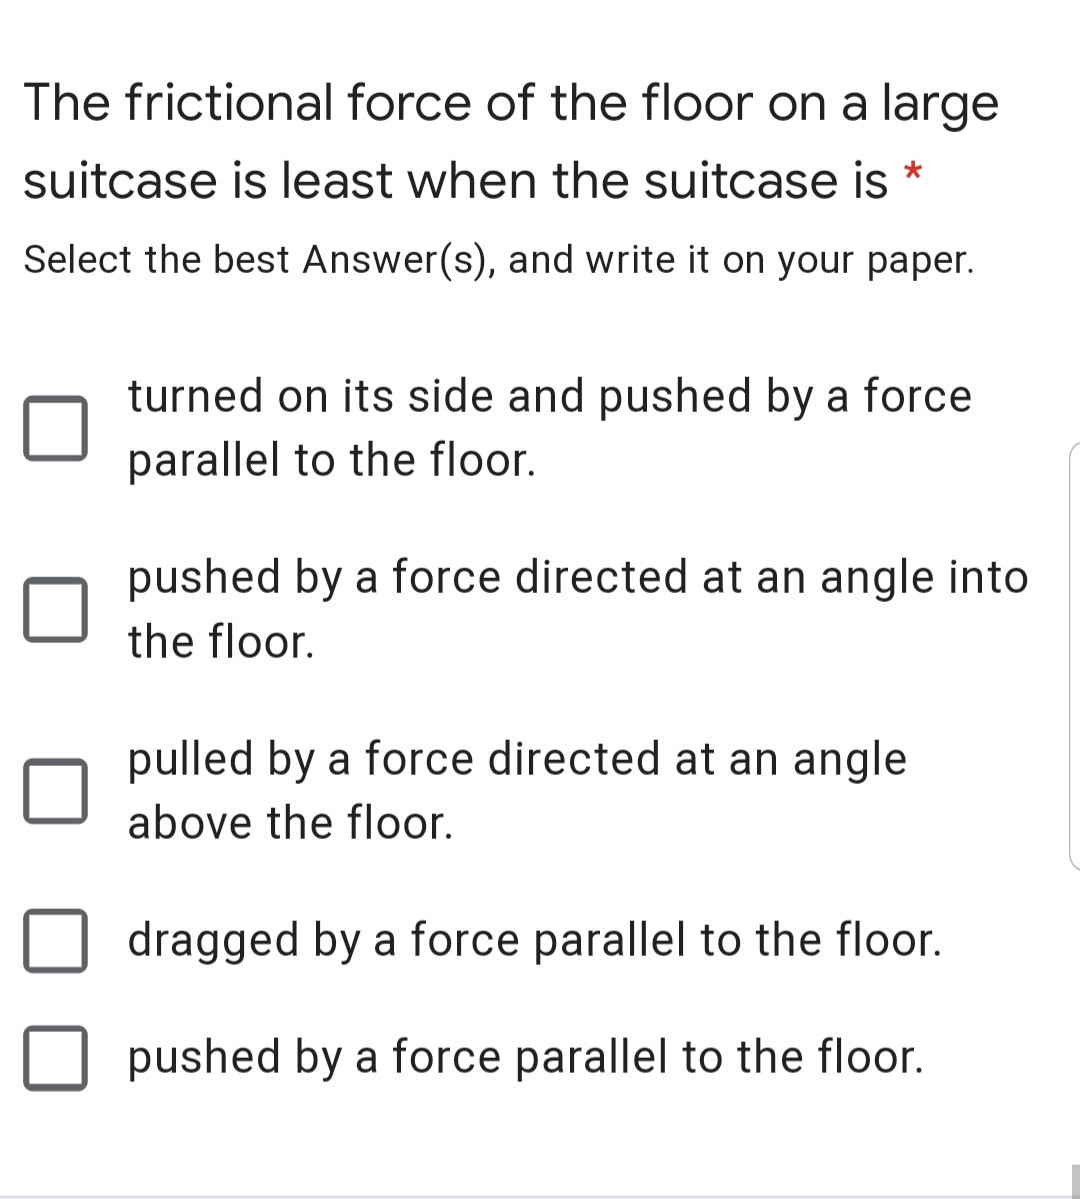 The frictional force of the floor on a large
suitcase is least when the suitcase is *
Select the best Answer(s), and write it on your paper.
turned on its side and pushed by a force
parallel to the floor.
pushed by a force directed at an angle into
the floor.
pulled by a force directed at an angle
above the floor.
dragged by a force parallel to the floor.
pushed by a force parallel to the floor.
